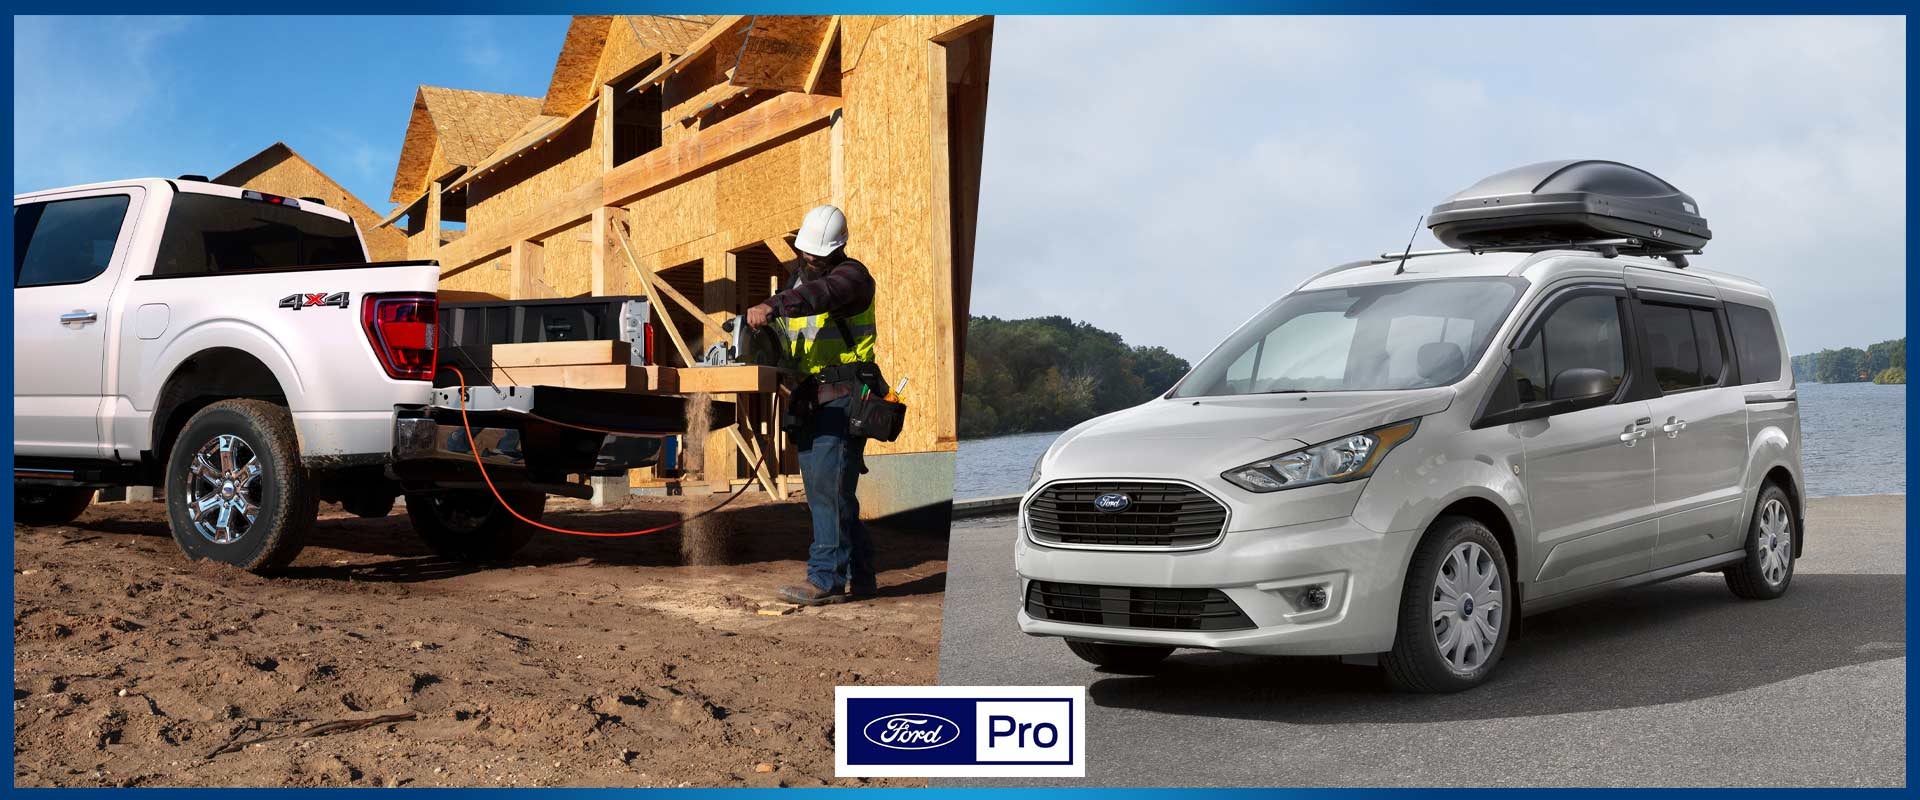 What Is Ford Pro Telematics